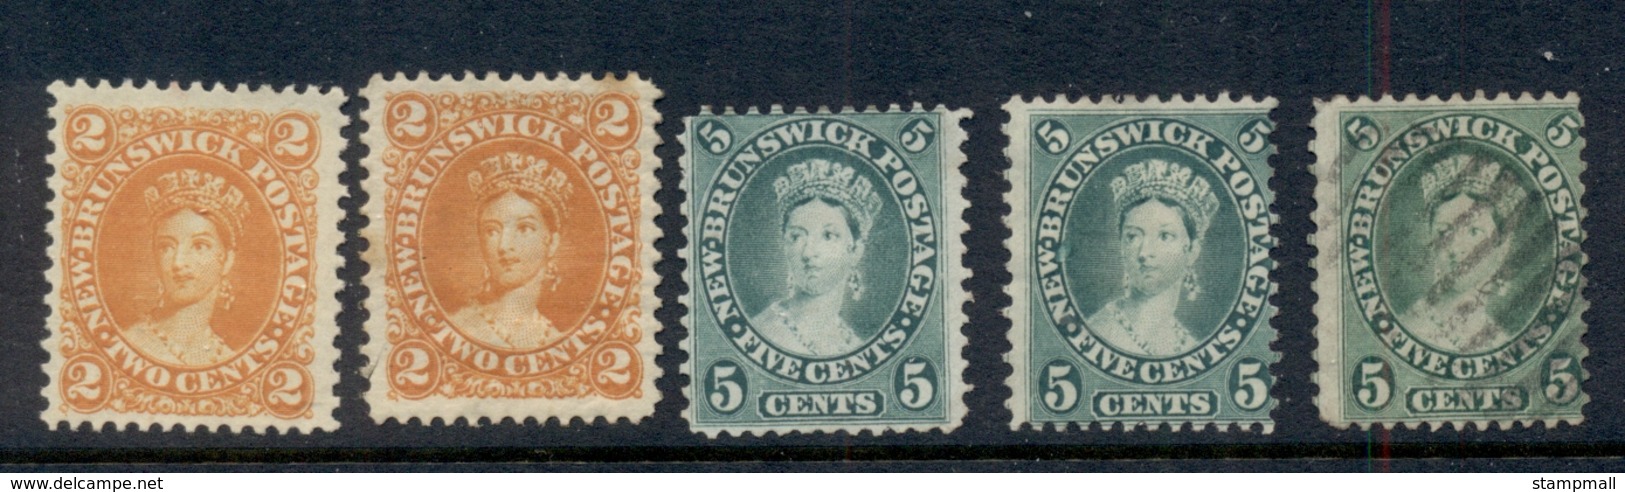 New Brunswick 1860-63 Queen Victoria 2c & 5c Asst. MNG/FU - Used Stamps